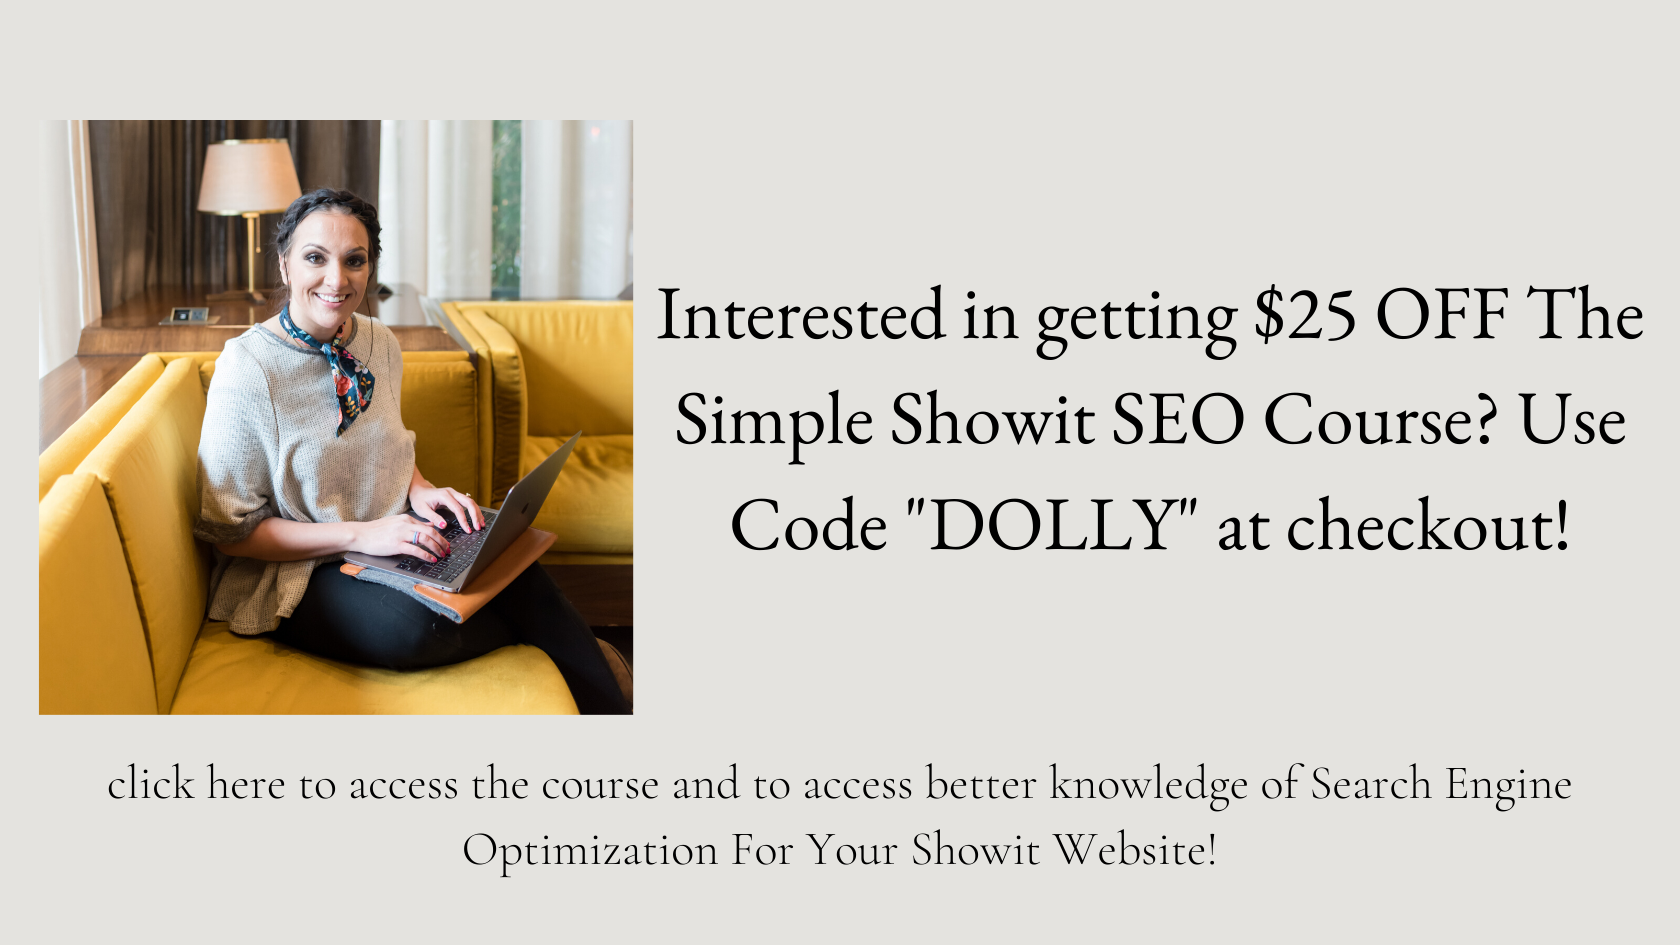 Simple Showit SEO Course Discount Code "DOLLY" For $25 OFF